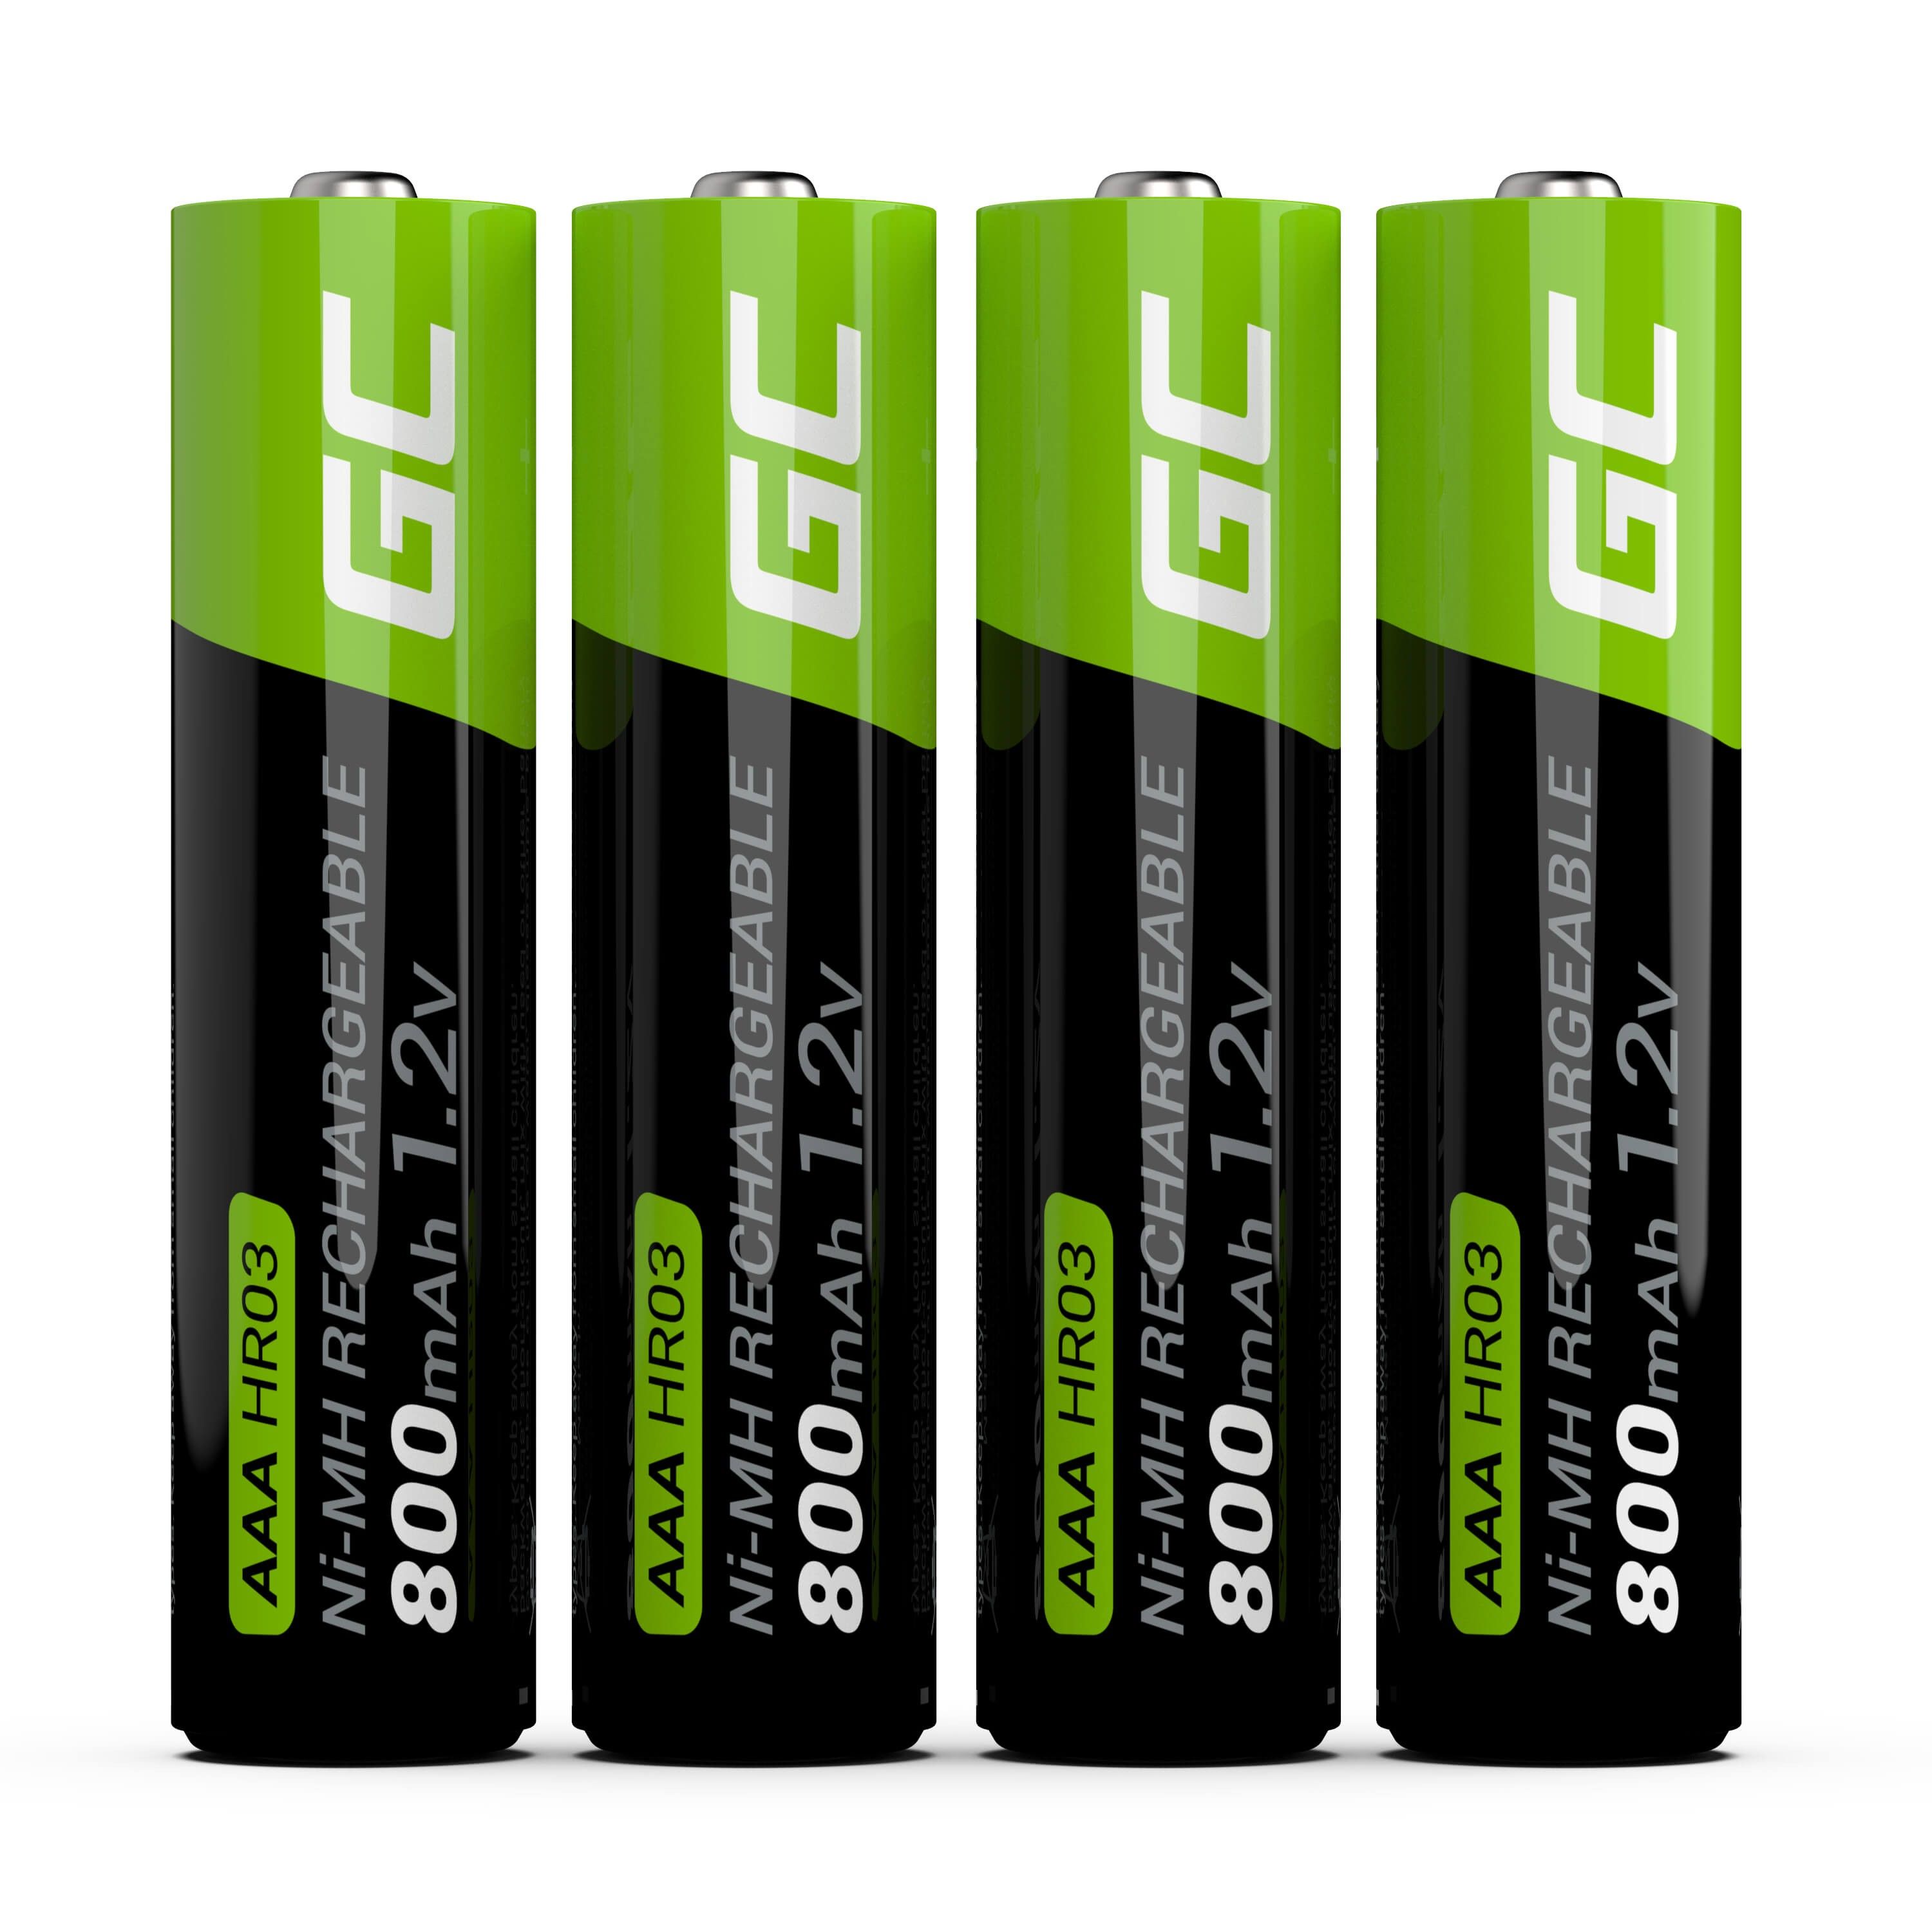 Green Cell GR04 household battery Rechargeable battery AAA Nickel-Metal Hydride (NiMH) 4X AAA R3 800MAH_2